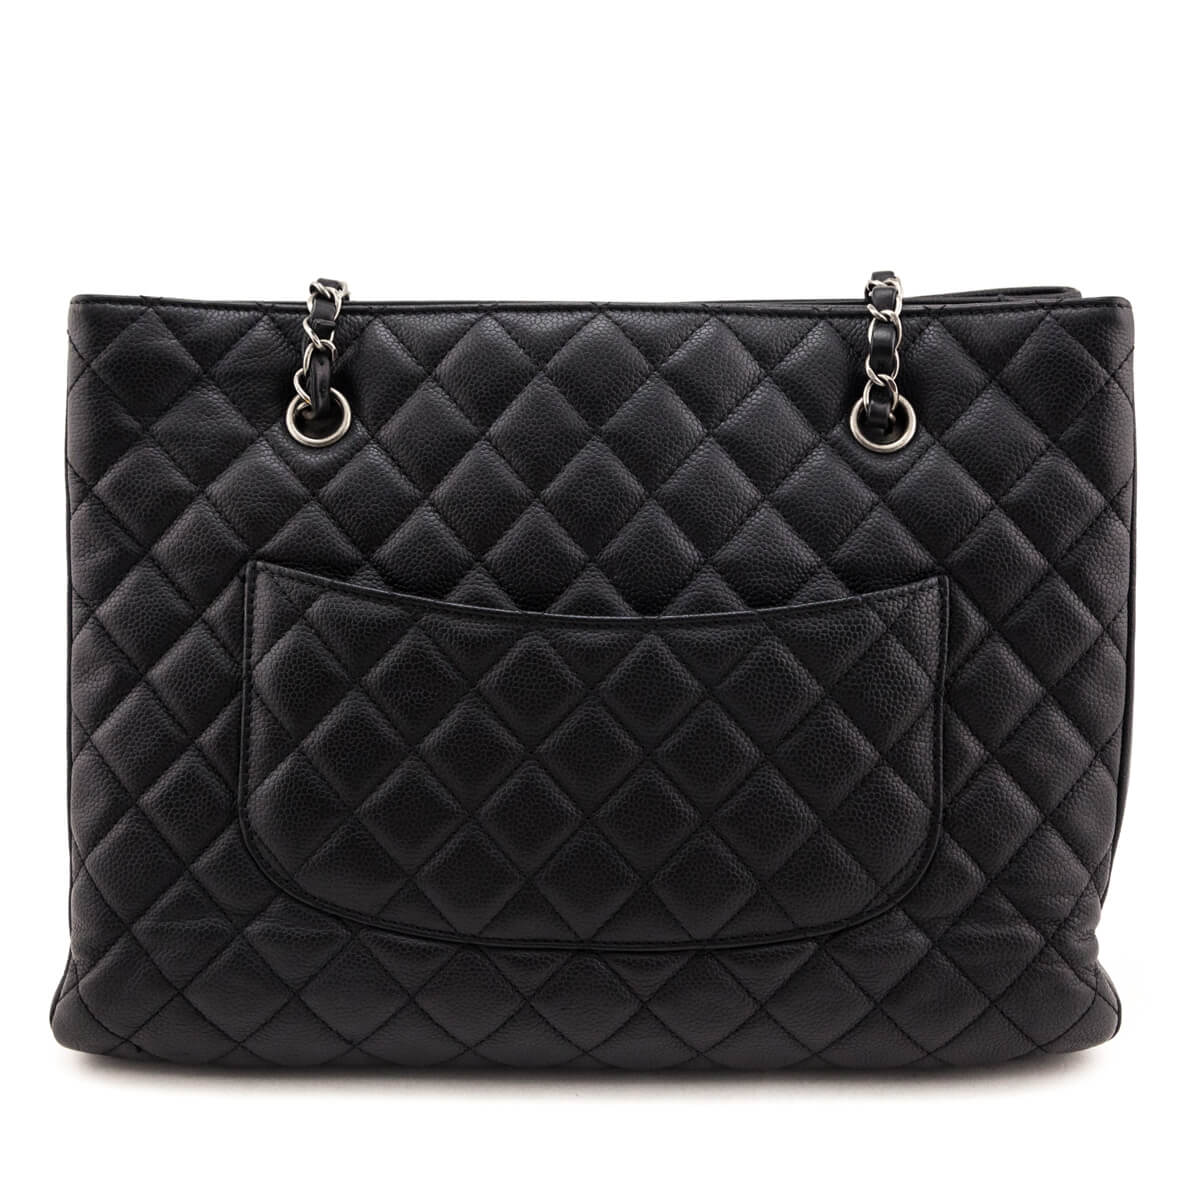 Chanel Black Caviar Quilted Large Tote - Love that Bag etc - Preowned Authentic Designer Handbags & Preloved Fashions